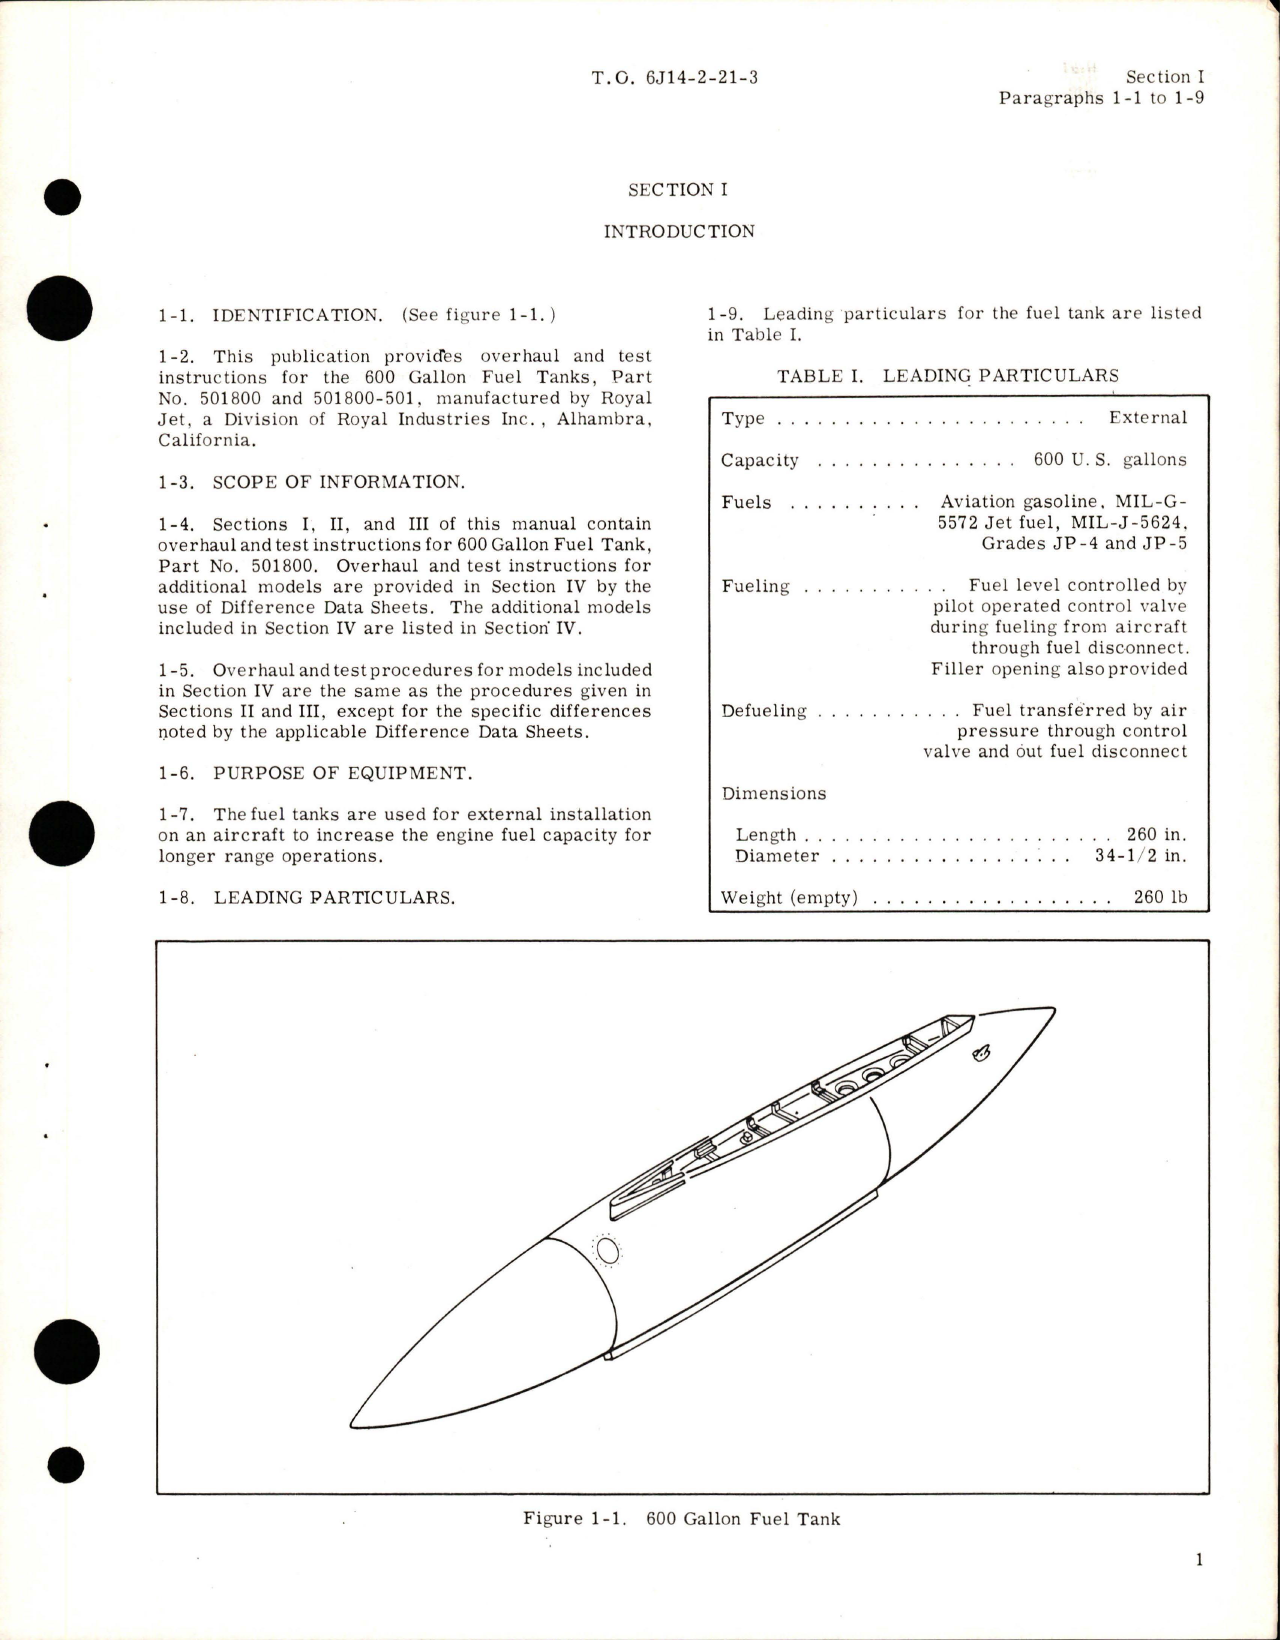 Sample page 5 from AirCorps Library document: Overhaul Instructions for 600 Gallon Fuel Tanks - Parts 501800 and 501800-501